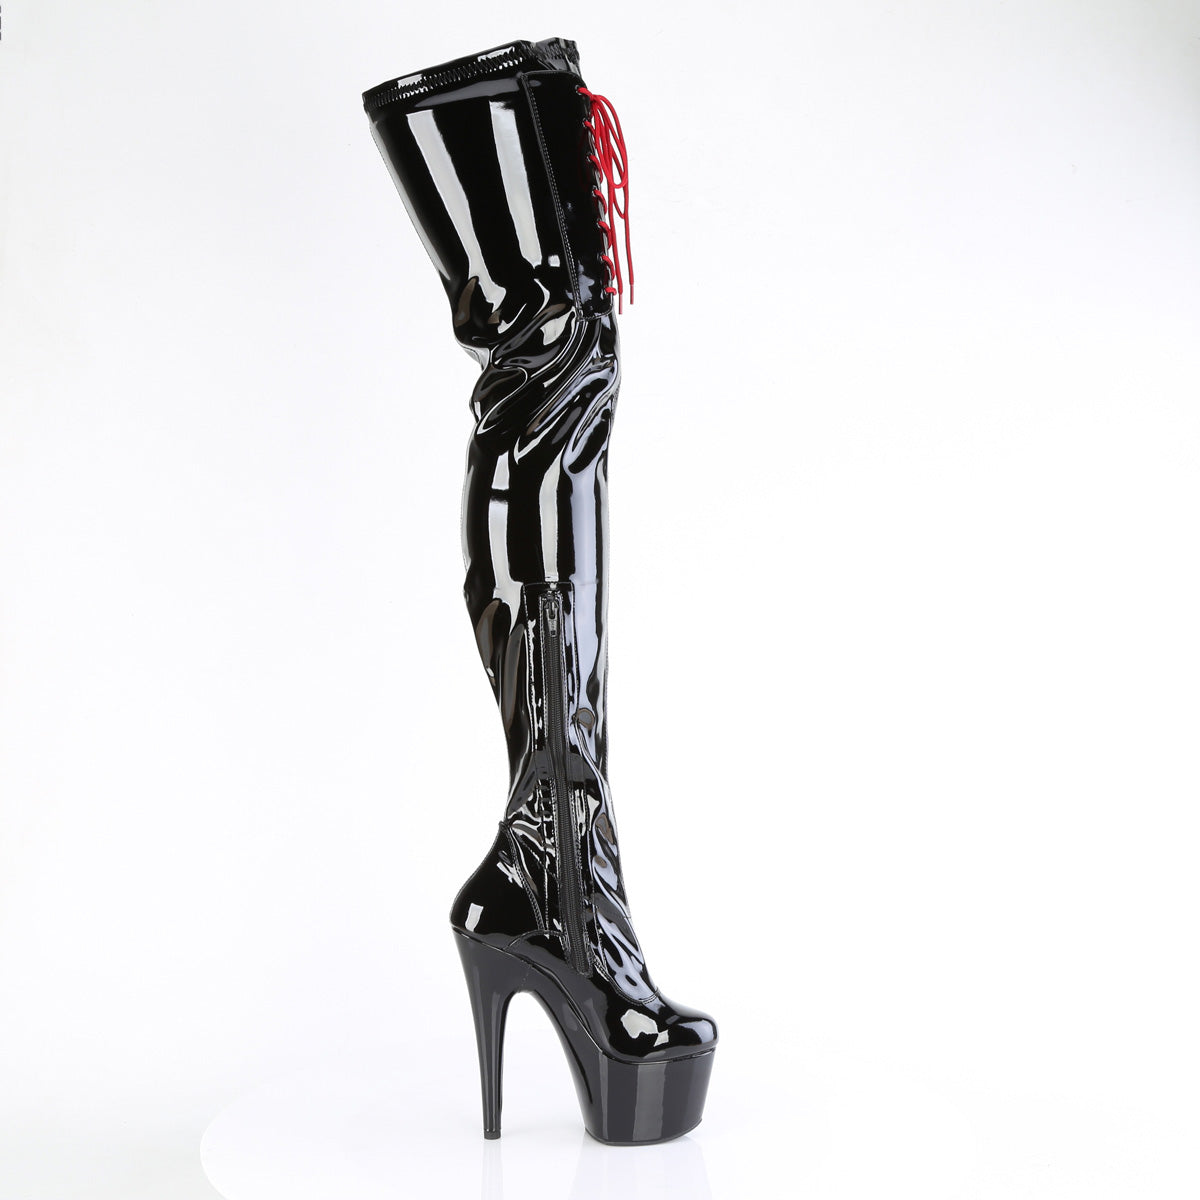 ADORE-4001WR Black & Red Thigh High Boots